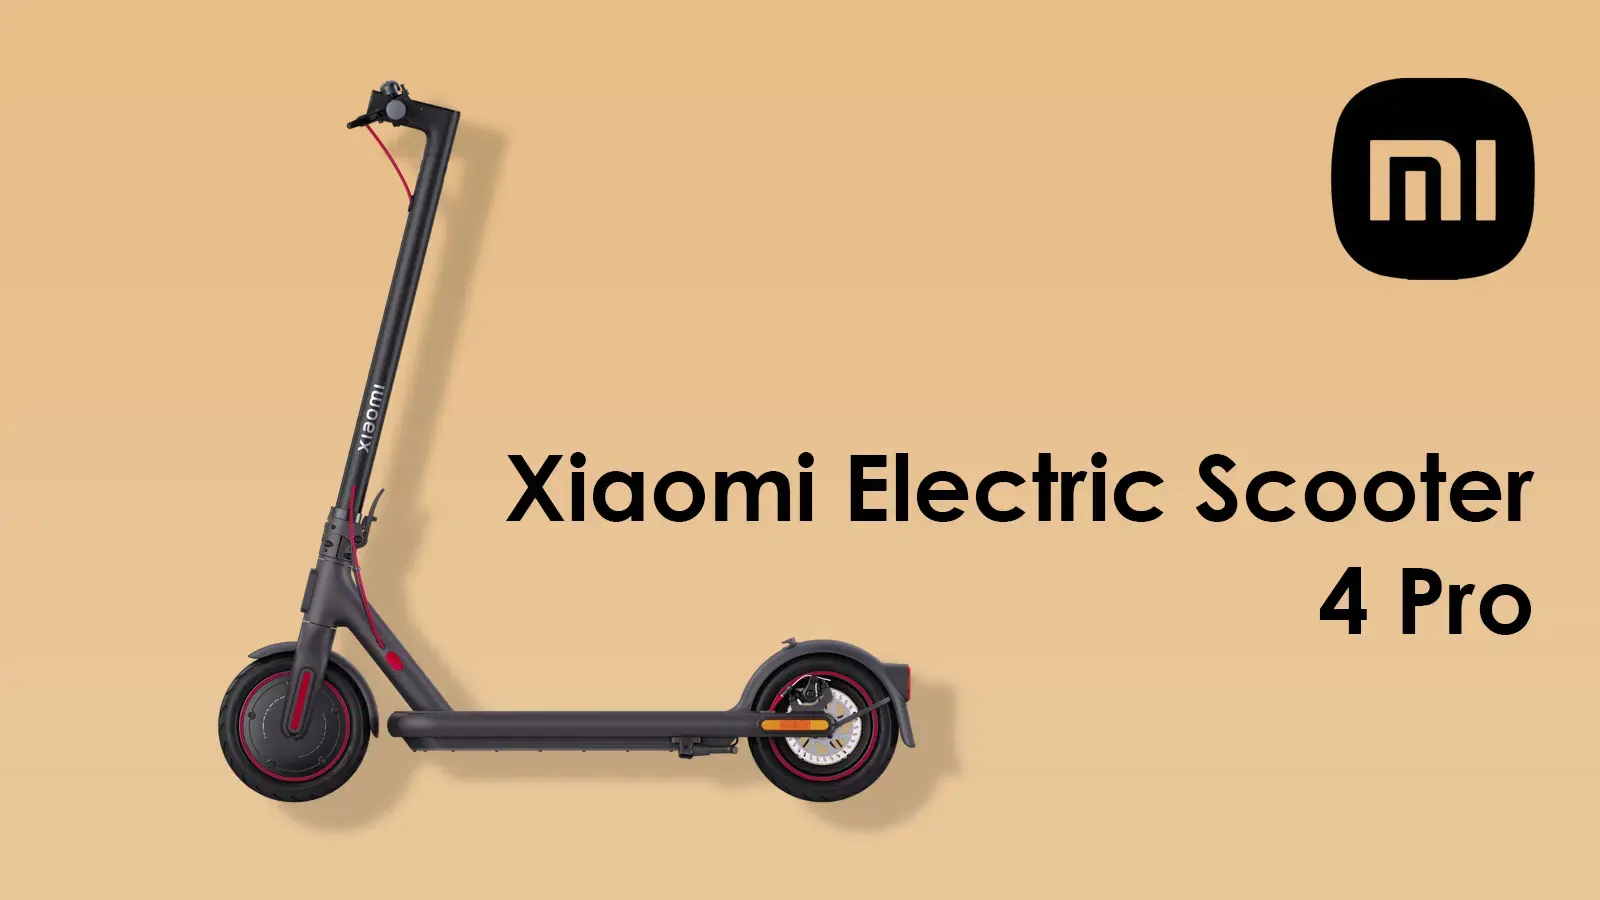 Review Xiaomi Electric Scooter 4 Pro in limba romana. Test si pareri